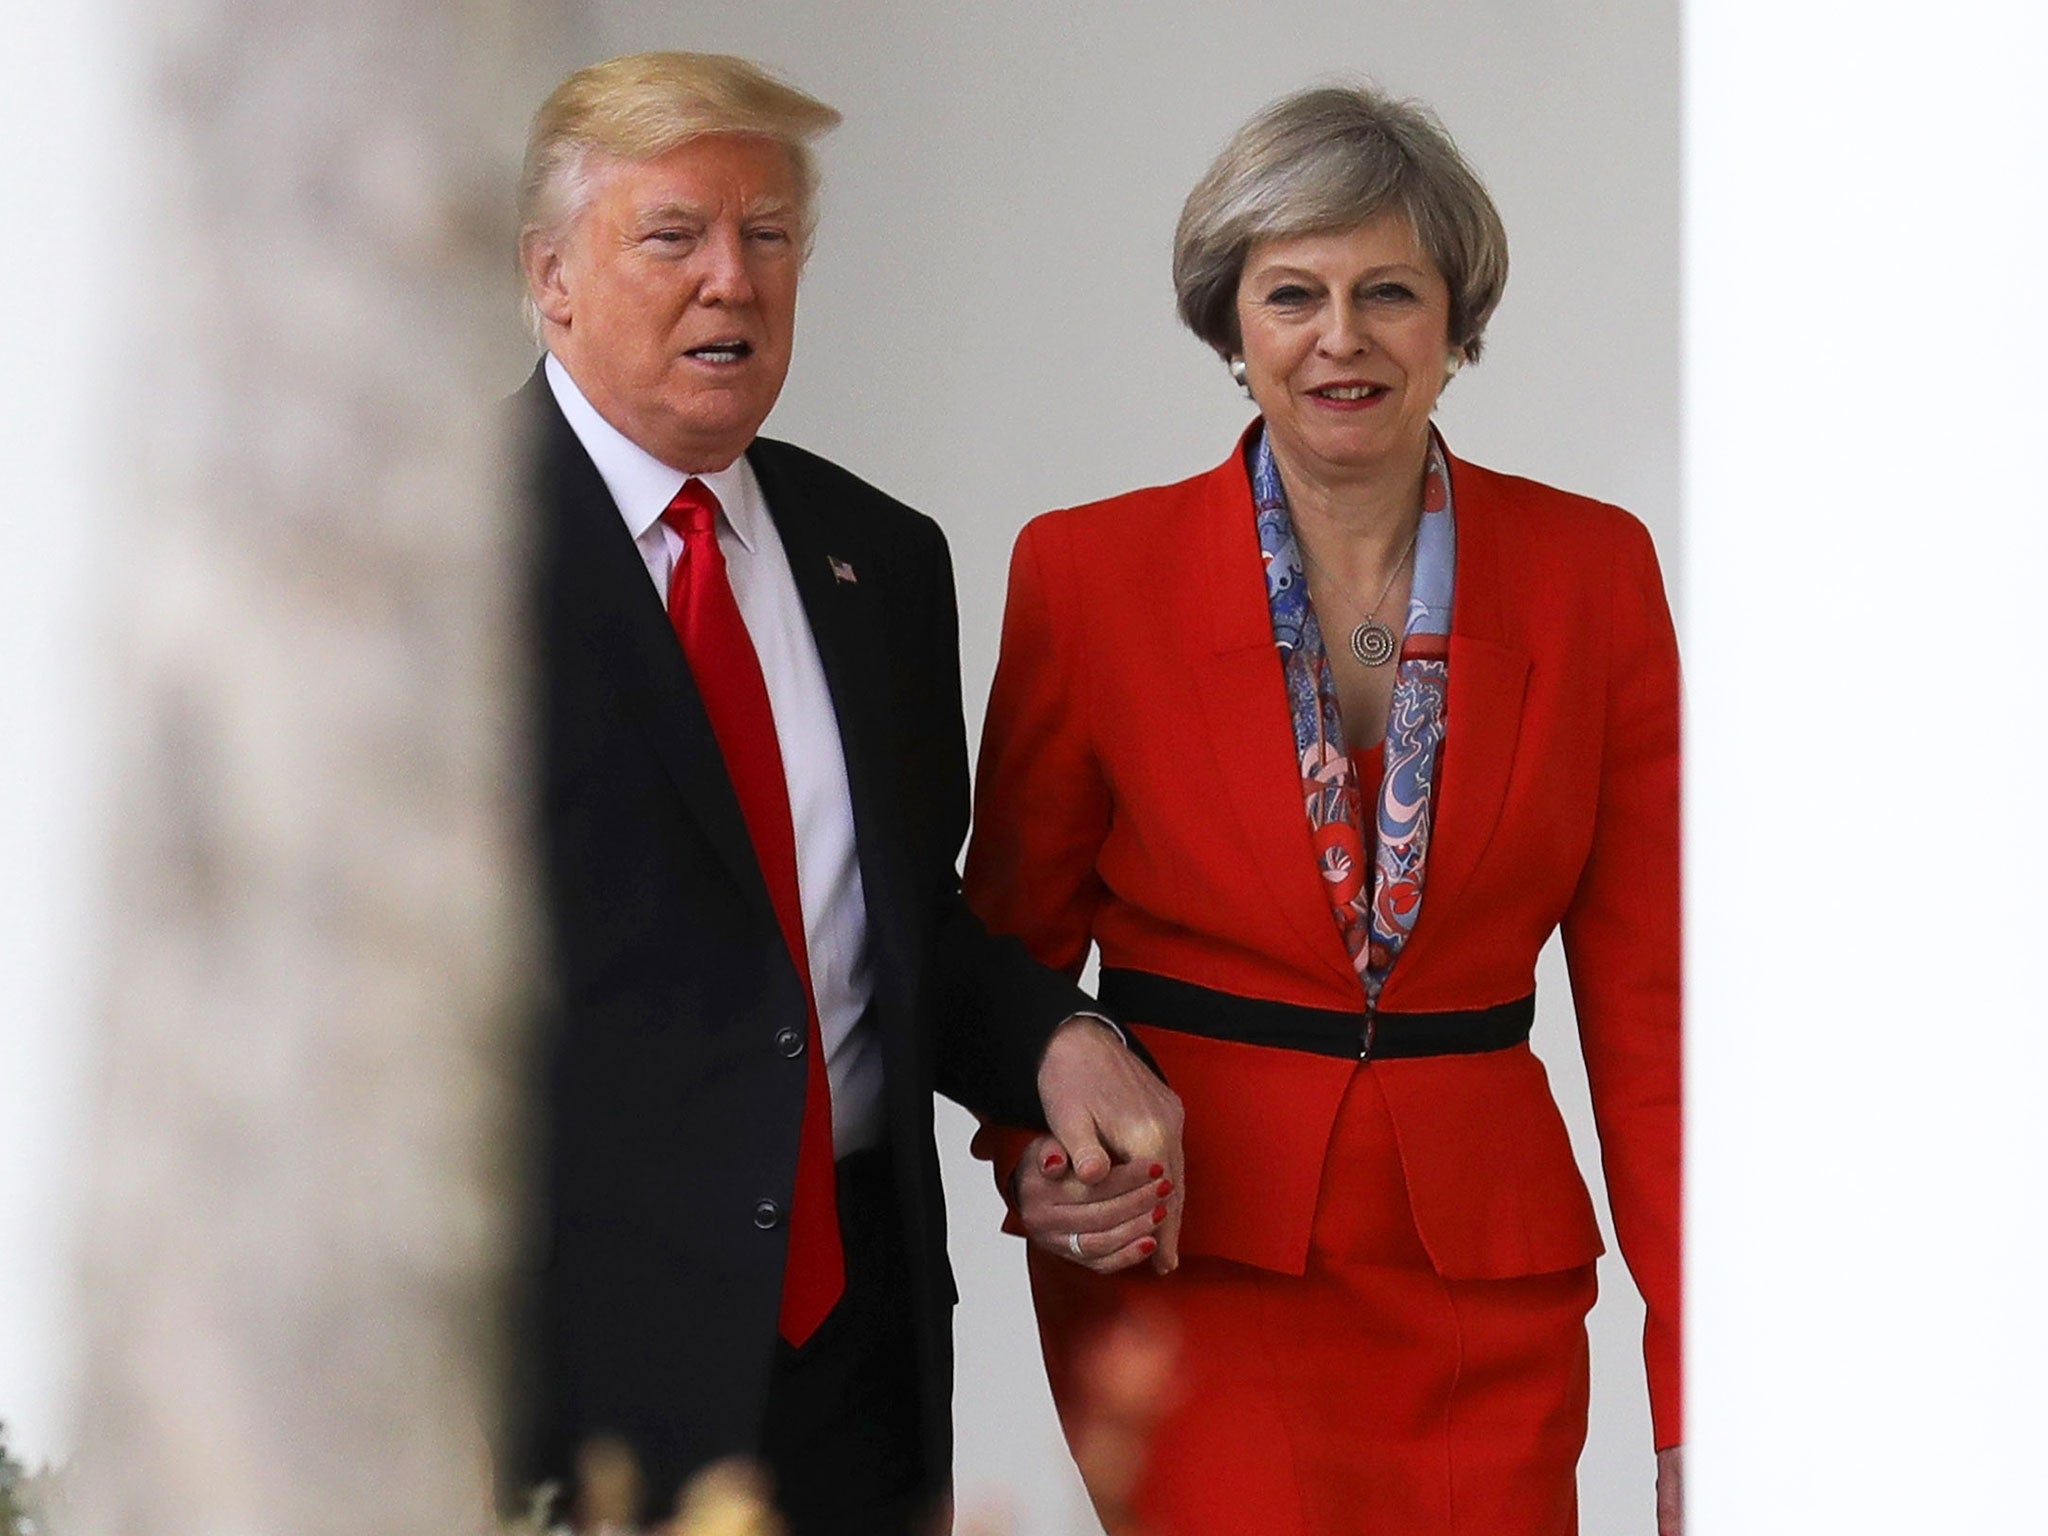 Theresa May and Donald Trump during the PM's visit to the White House